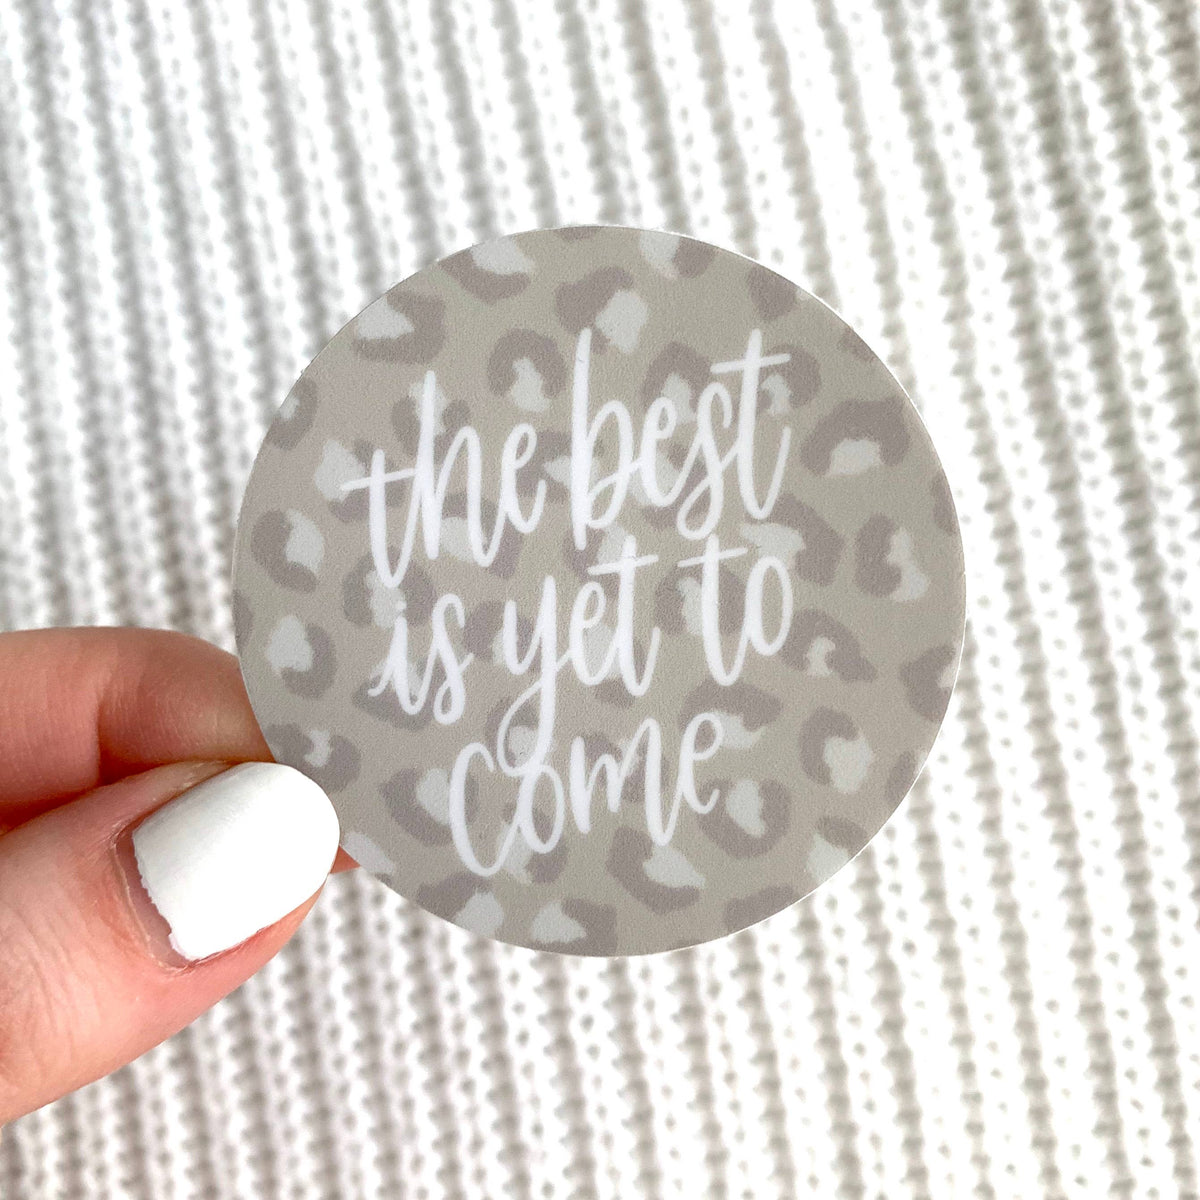 The Best is Yet to Come Sticker 2x2in.